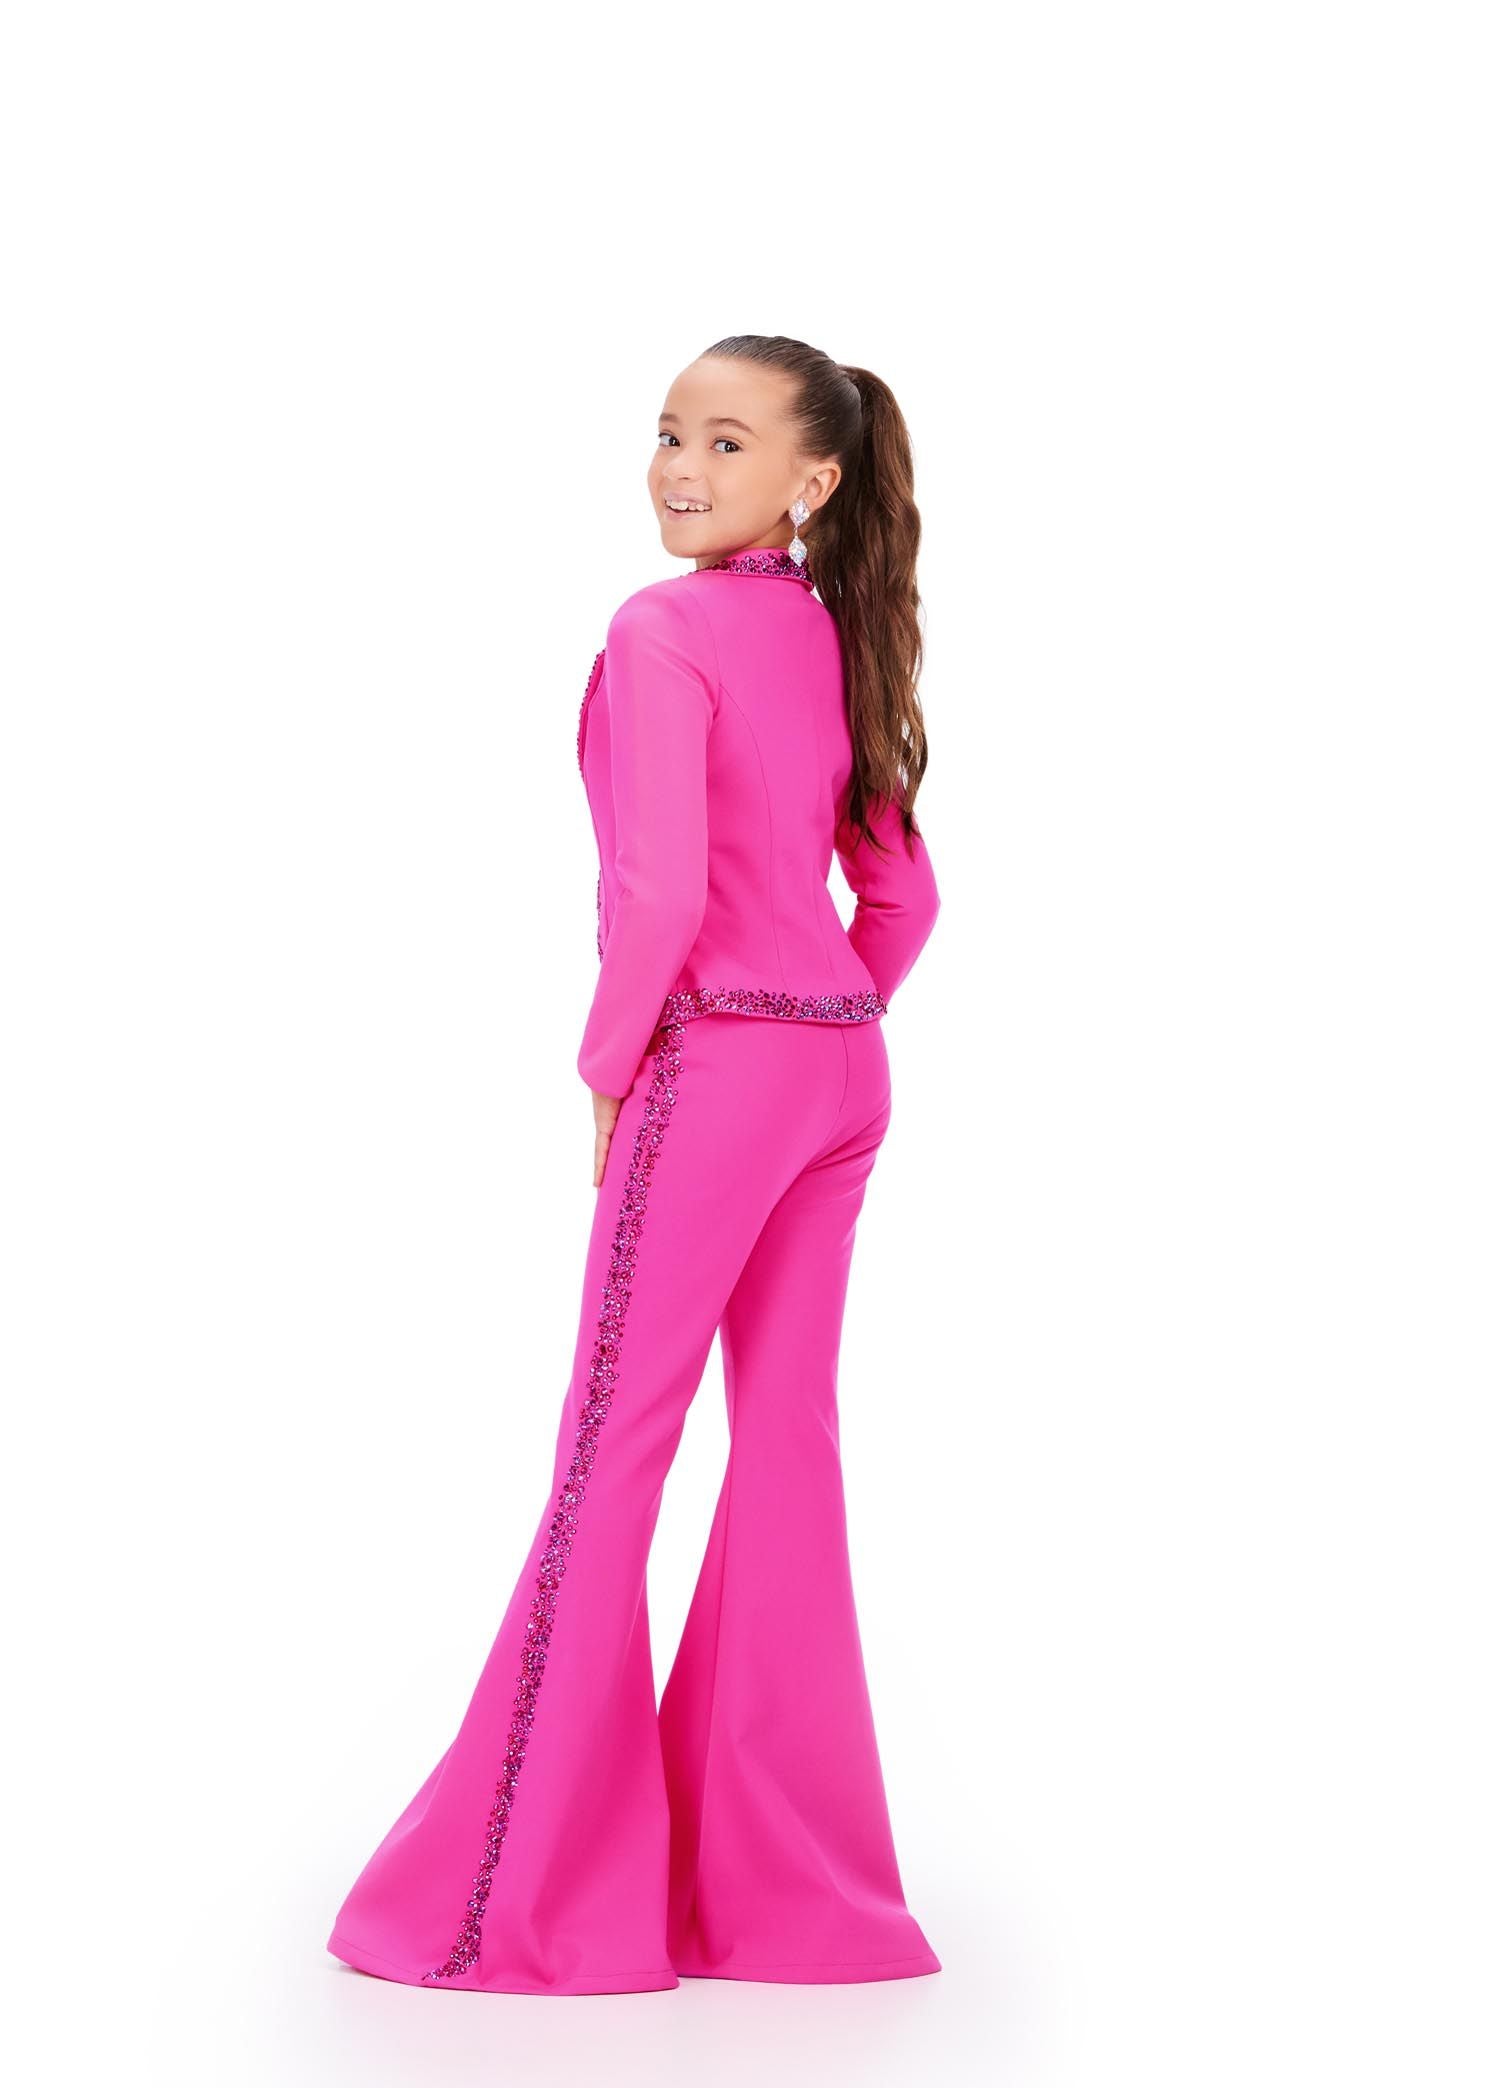 The Ashley Lauren Kids 8209 Two Piece Jumpsuit Suit features bell-bottom trousers and a crystal-studded jacket for a fashionable pageant look. High-quality materials ensure long-lasting comfort and style. Strike a pose in this fun and fabulous two piece set! Made from scuba, this suit has press on stones that trim the jacket and pant legs.  Two Piece Press On Stone Trim Flare Pant Legs Jumpsuit Sizes: 2-16 Colors: Black, Fuchsia, Royal Blue